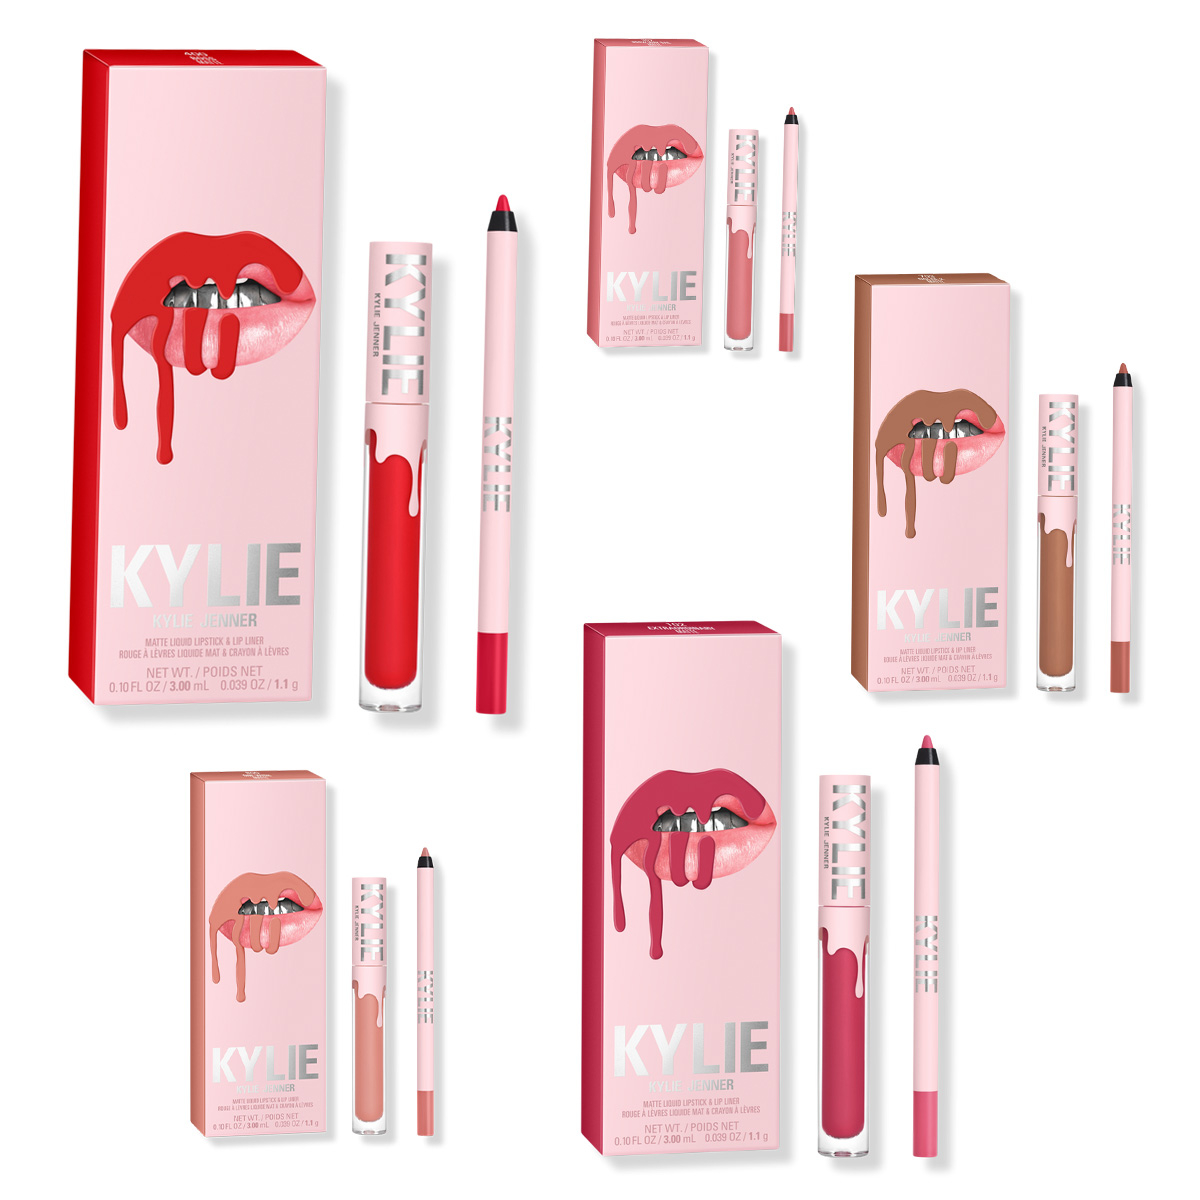 Kylie Cosmetics 24-Hour Deal: Get Kylie Jenner's Lip Kits for 50% Off